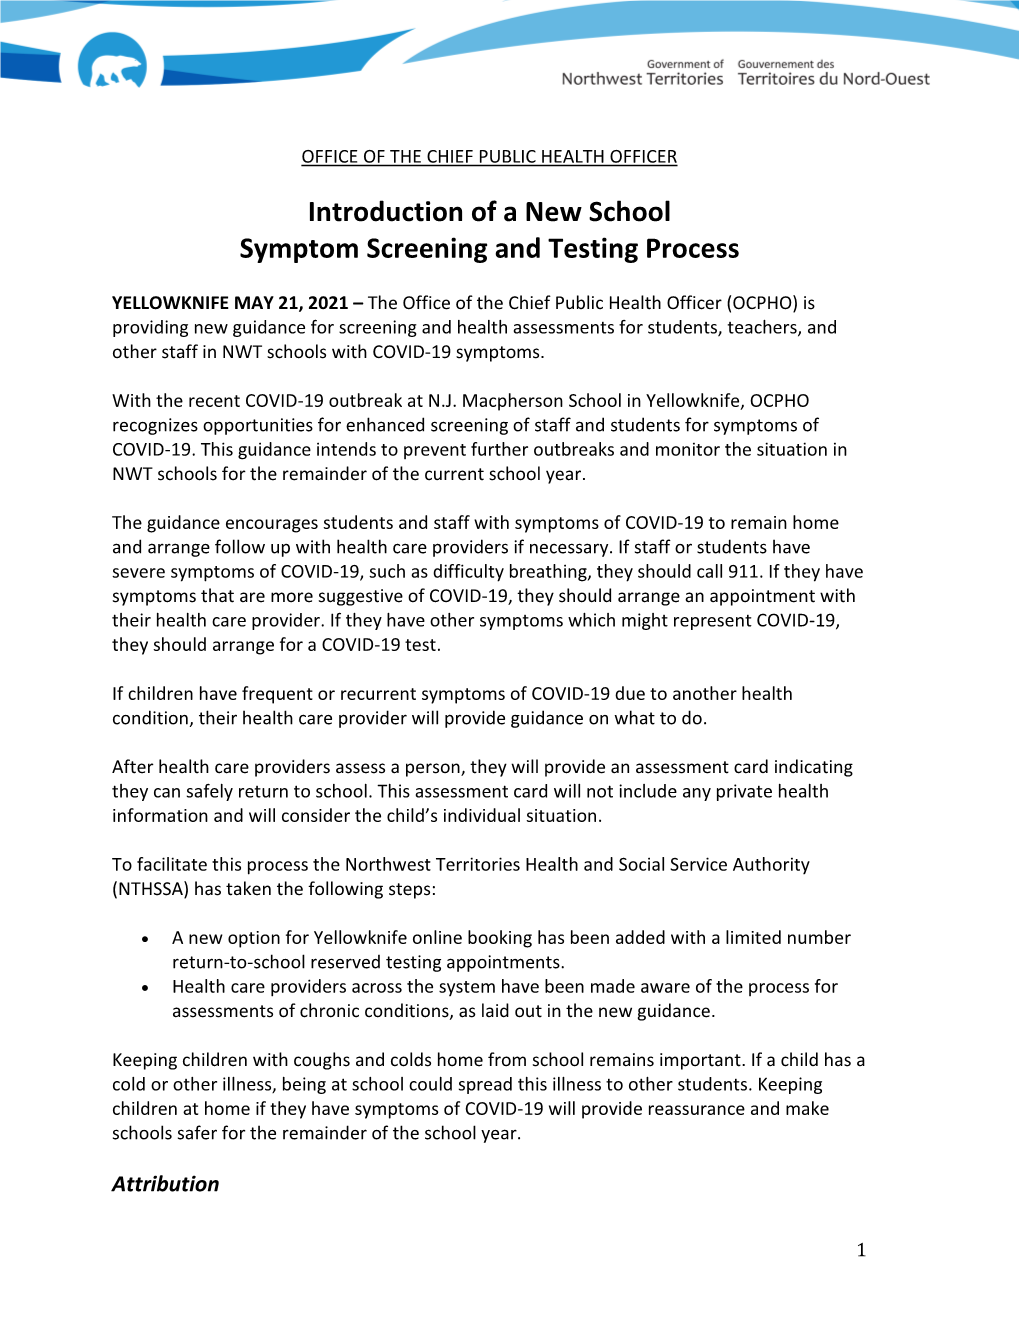 Introduction of a New School Symptom Screening and Testing Process